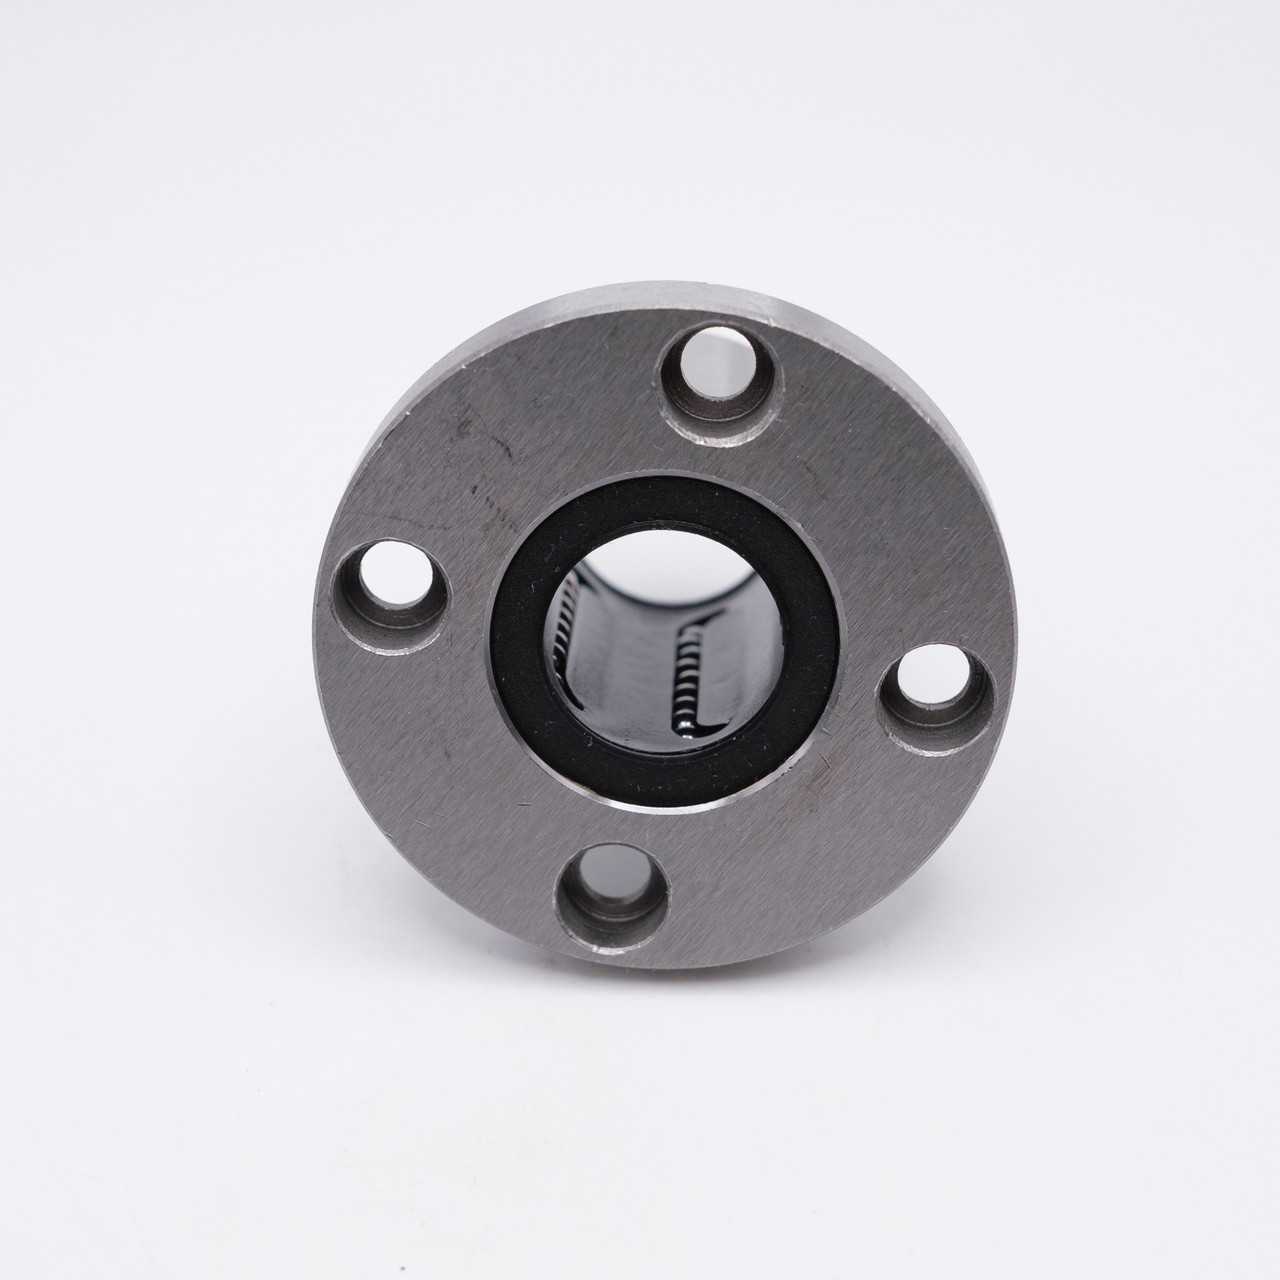 LMF16GUU Linear Motion Flanged Ball Bushing 16x28x37 Front View